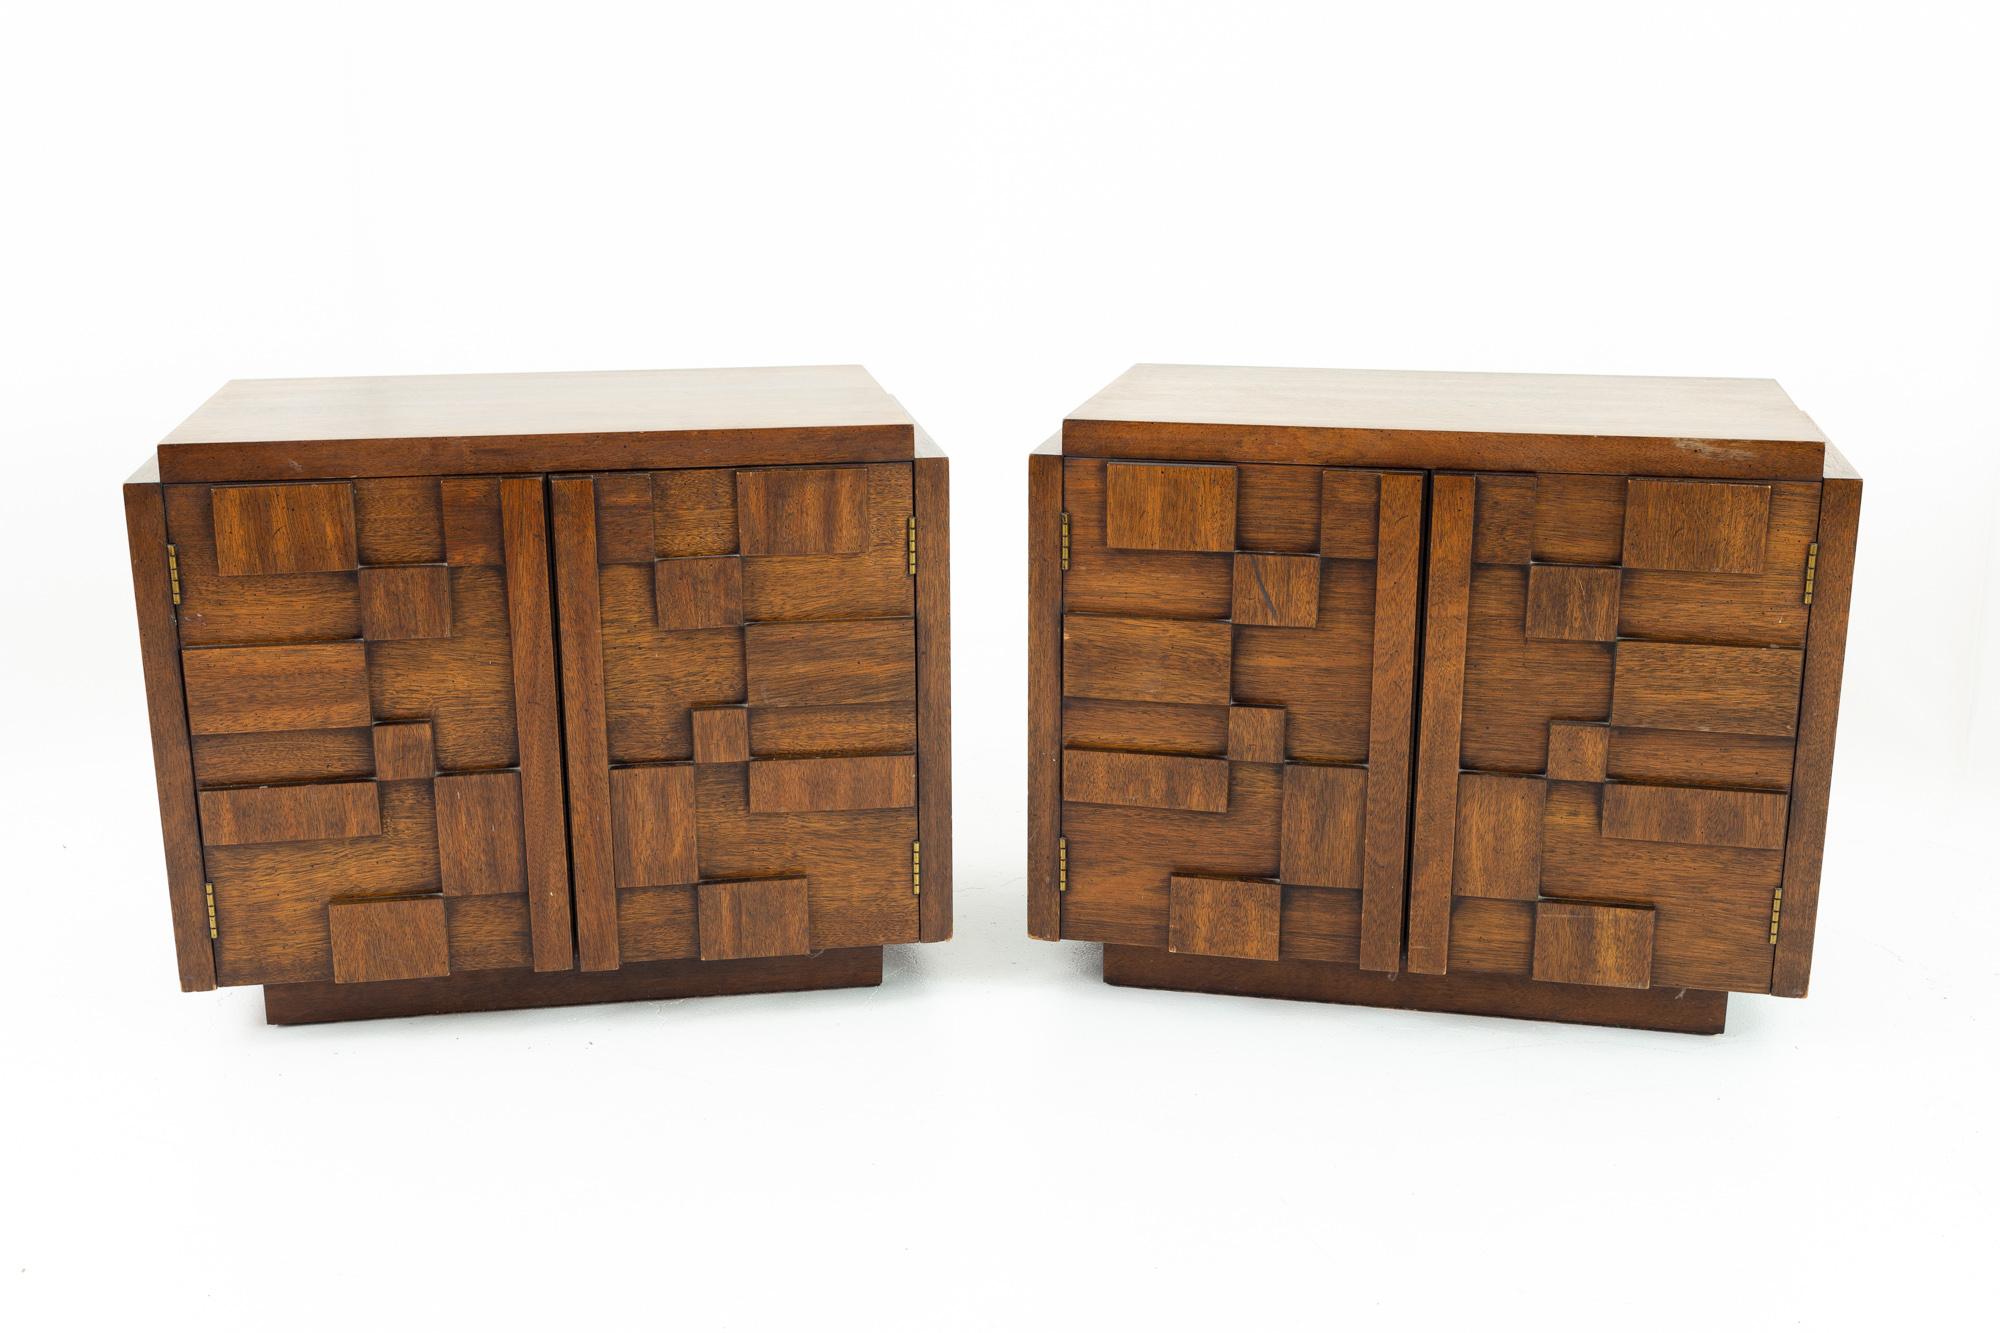 Paul Evans Style Lane Brutalist mid-century nightstand side end tables - pair

Each nightstand measures: 28 wide x 16.5 deep x 22.25 inches high

?All pieces of furniture can be had in what we call restored vintage condition. That means the